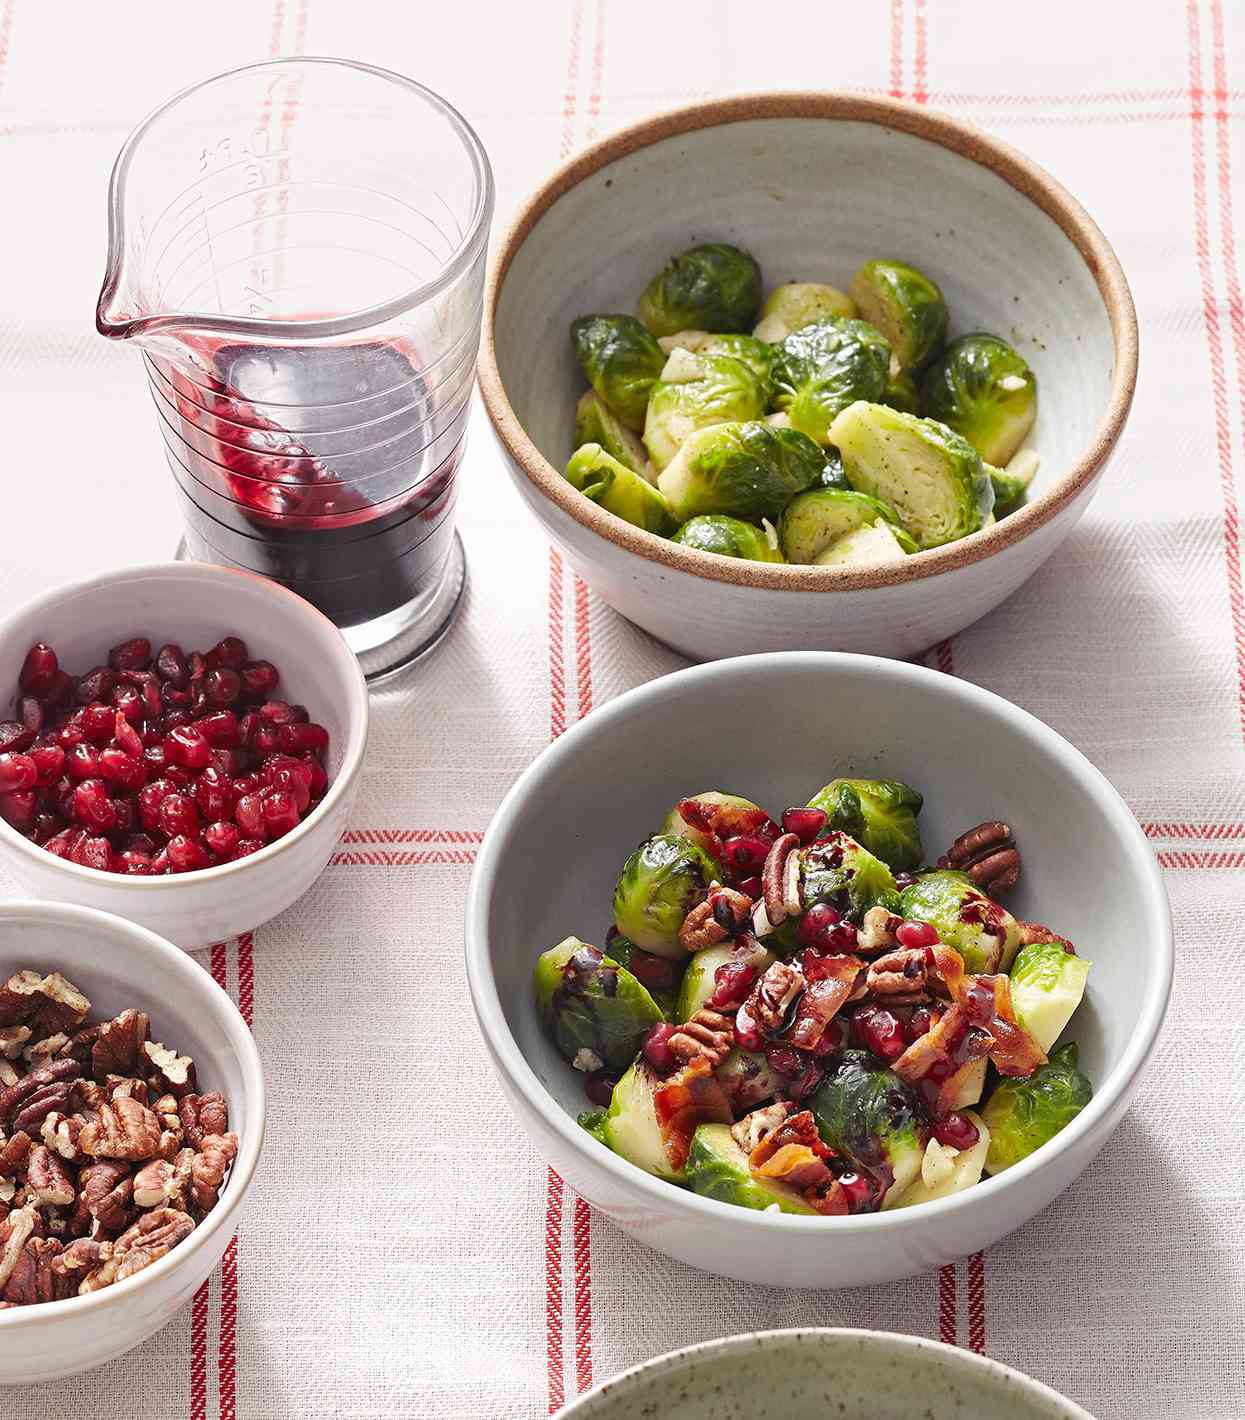 Vanilla-Butter Brussels Sprouts with Pomegranate Syrup